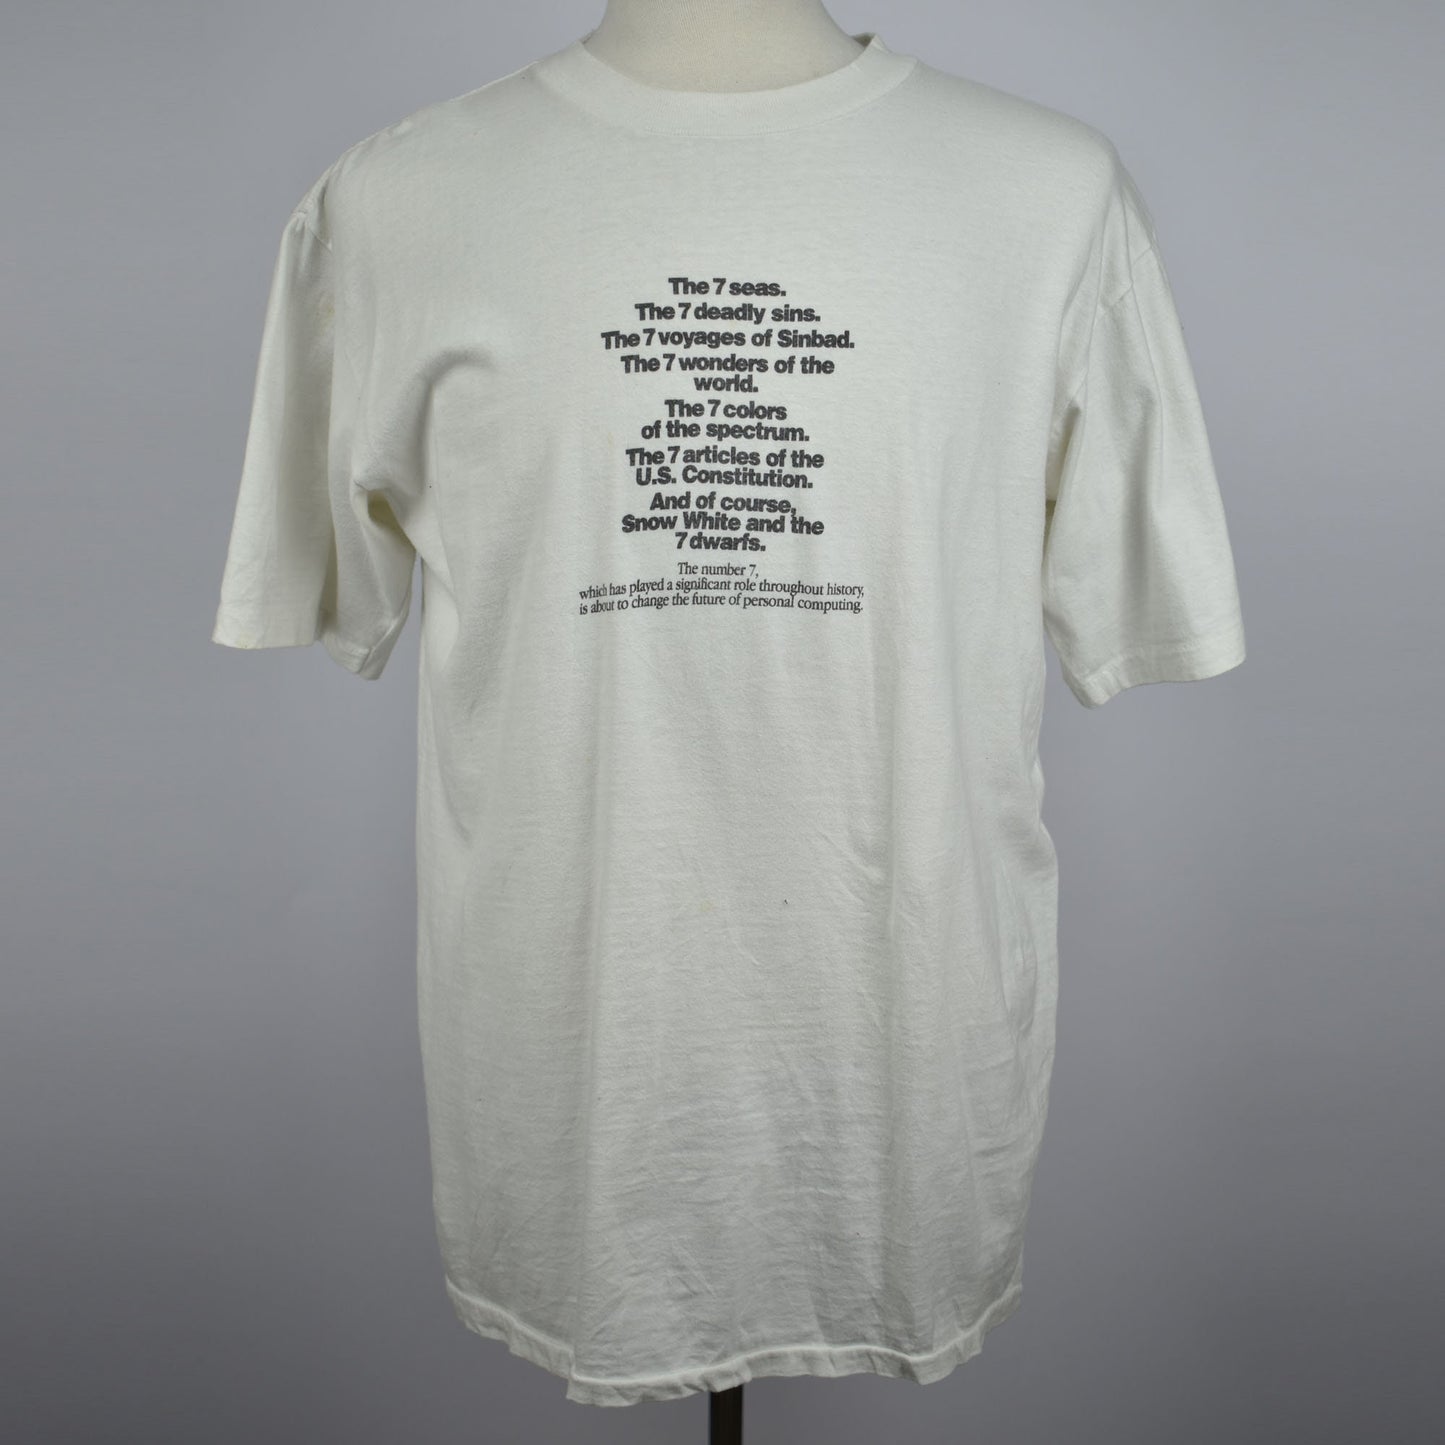 Vintage Very Rare 1991 Apple System 7 for Macintosh. History in the Making Single Stitch T-shirt